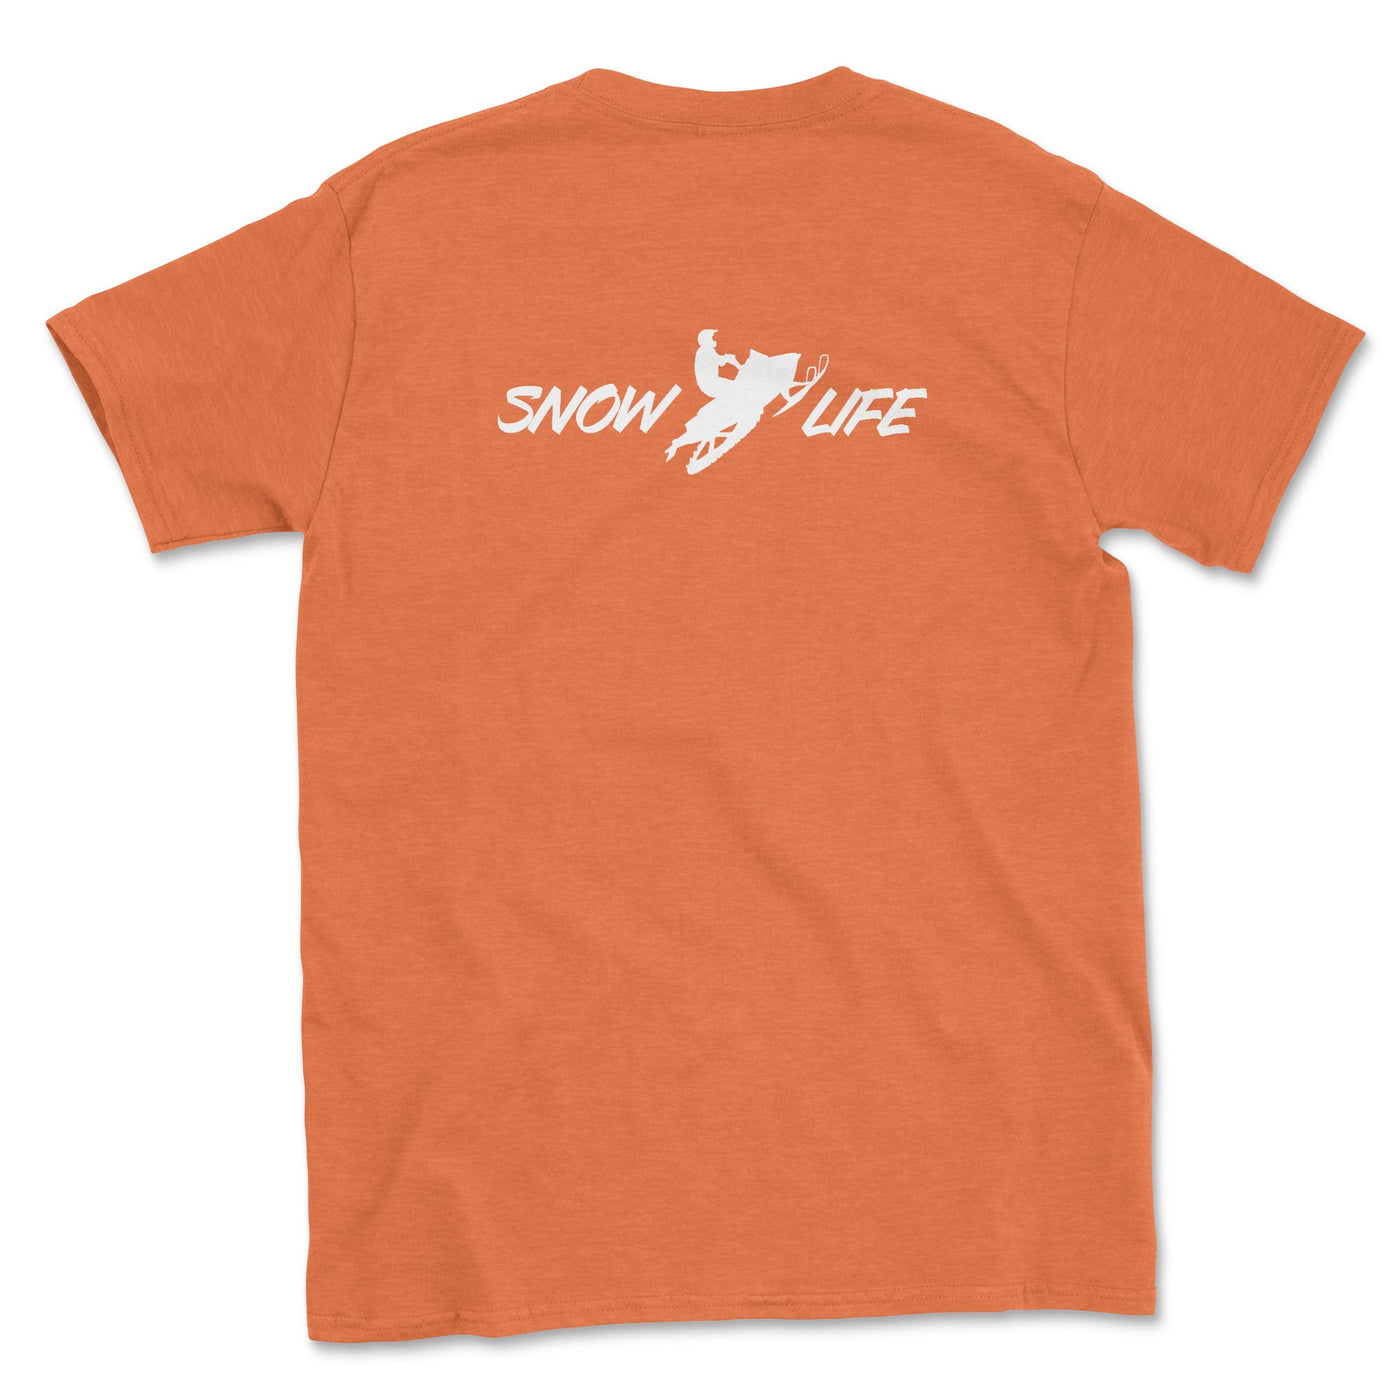 Snowmobiling Sled Life T-shirt - Goats Trail Off-Road Apparel Company